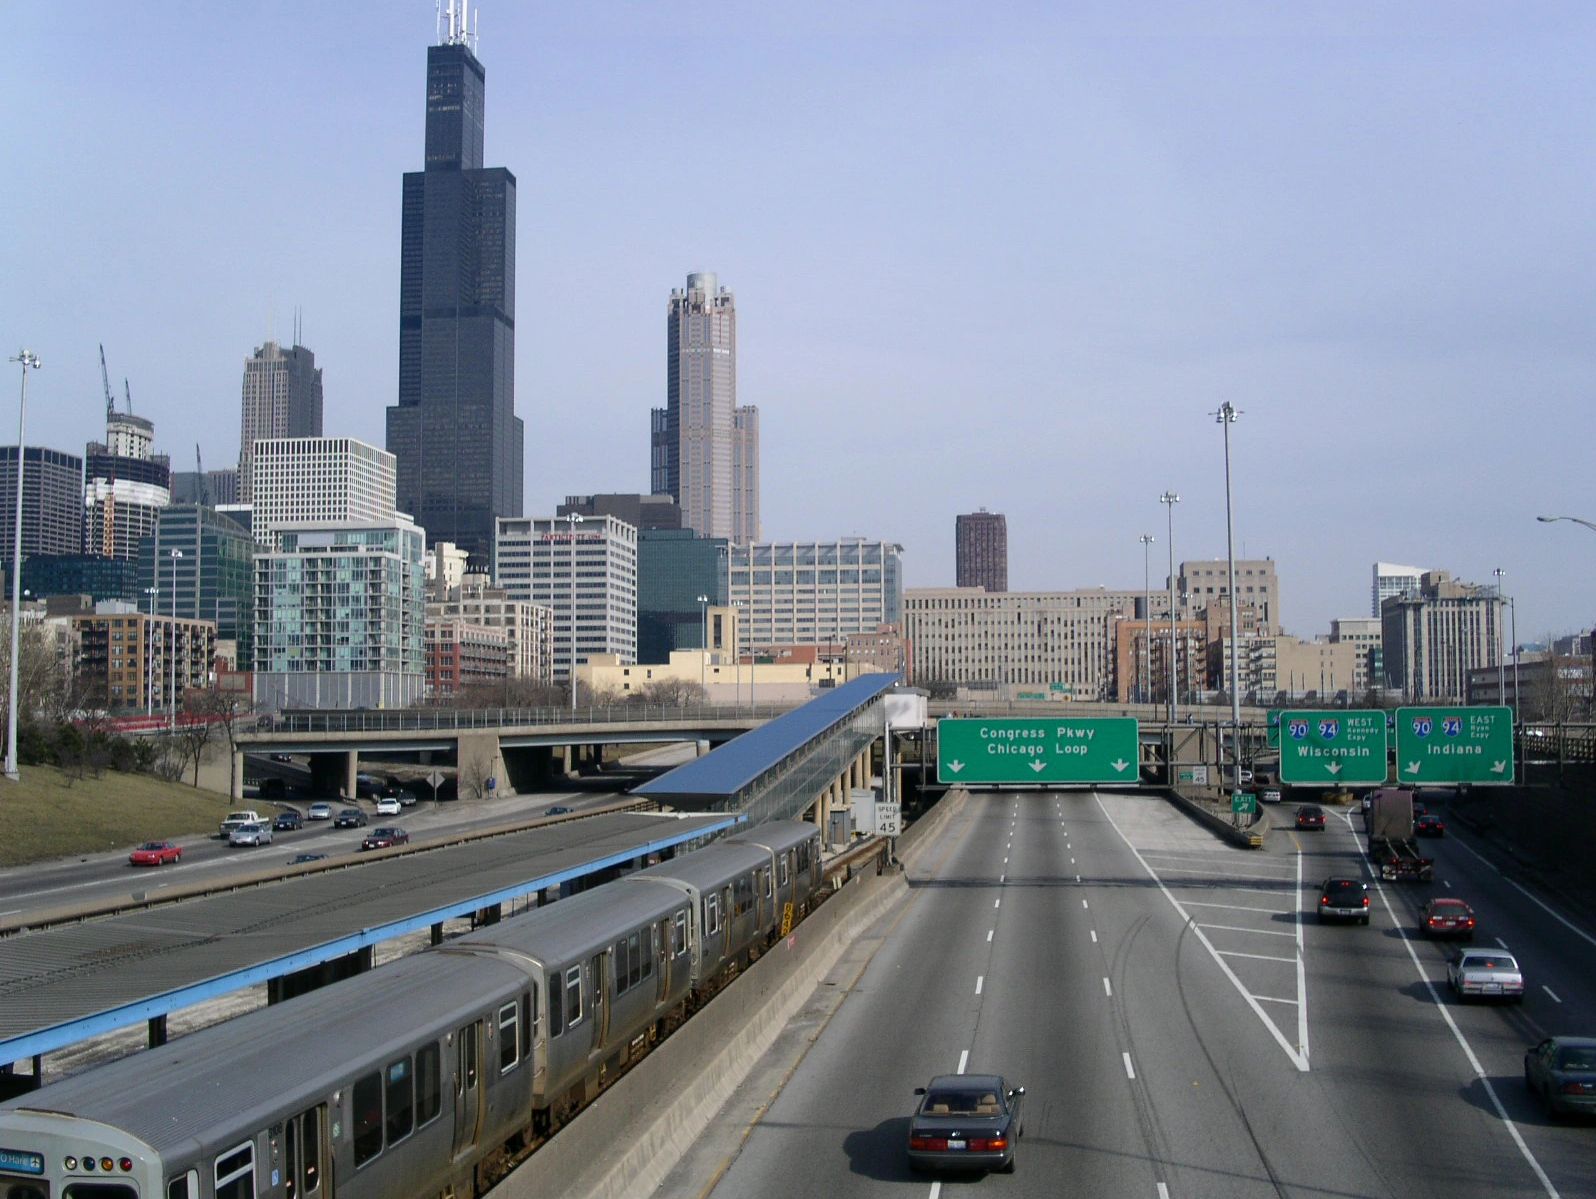 The Chicago skyline with a train, highway, and green road signs ahead that reads, "Chicago Loop".